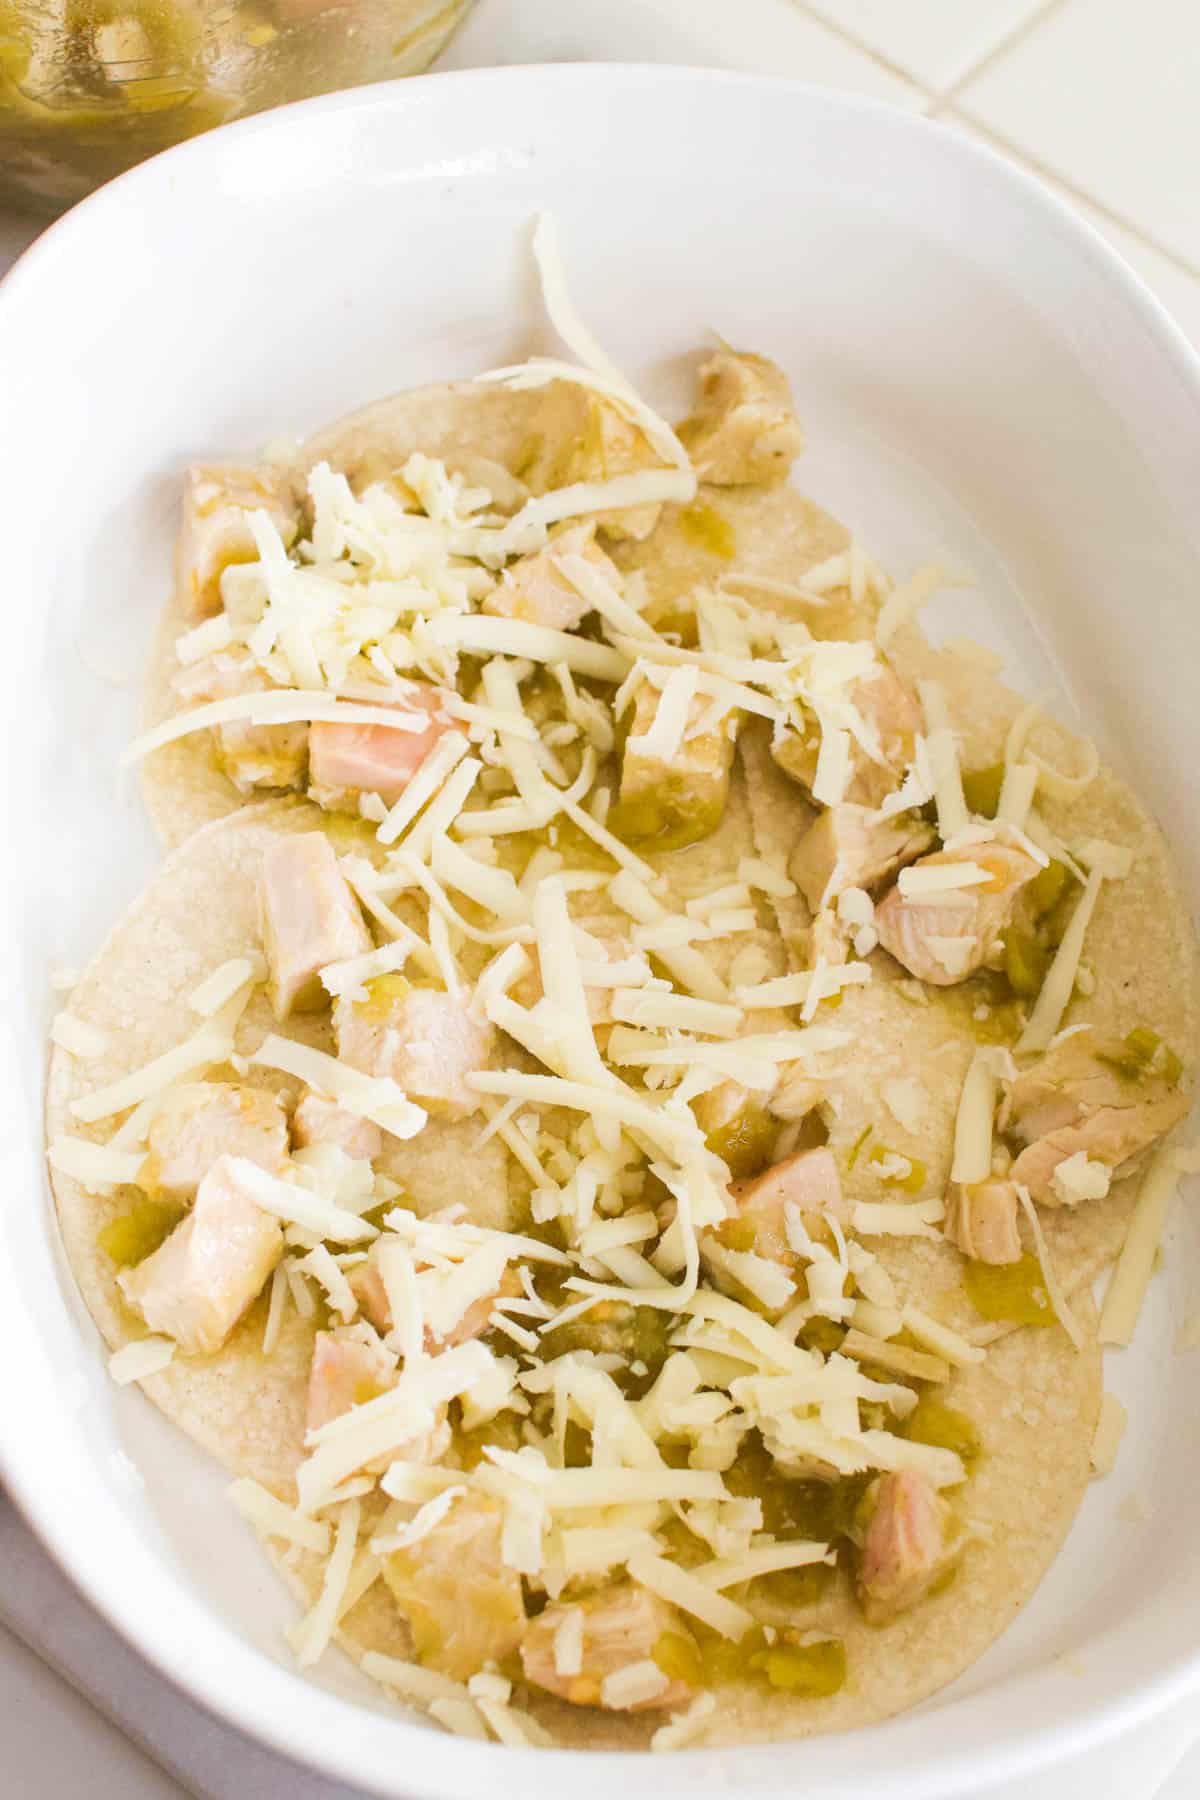 Baking dish layered with chicken, grated cheese and green chiles.